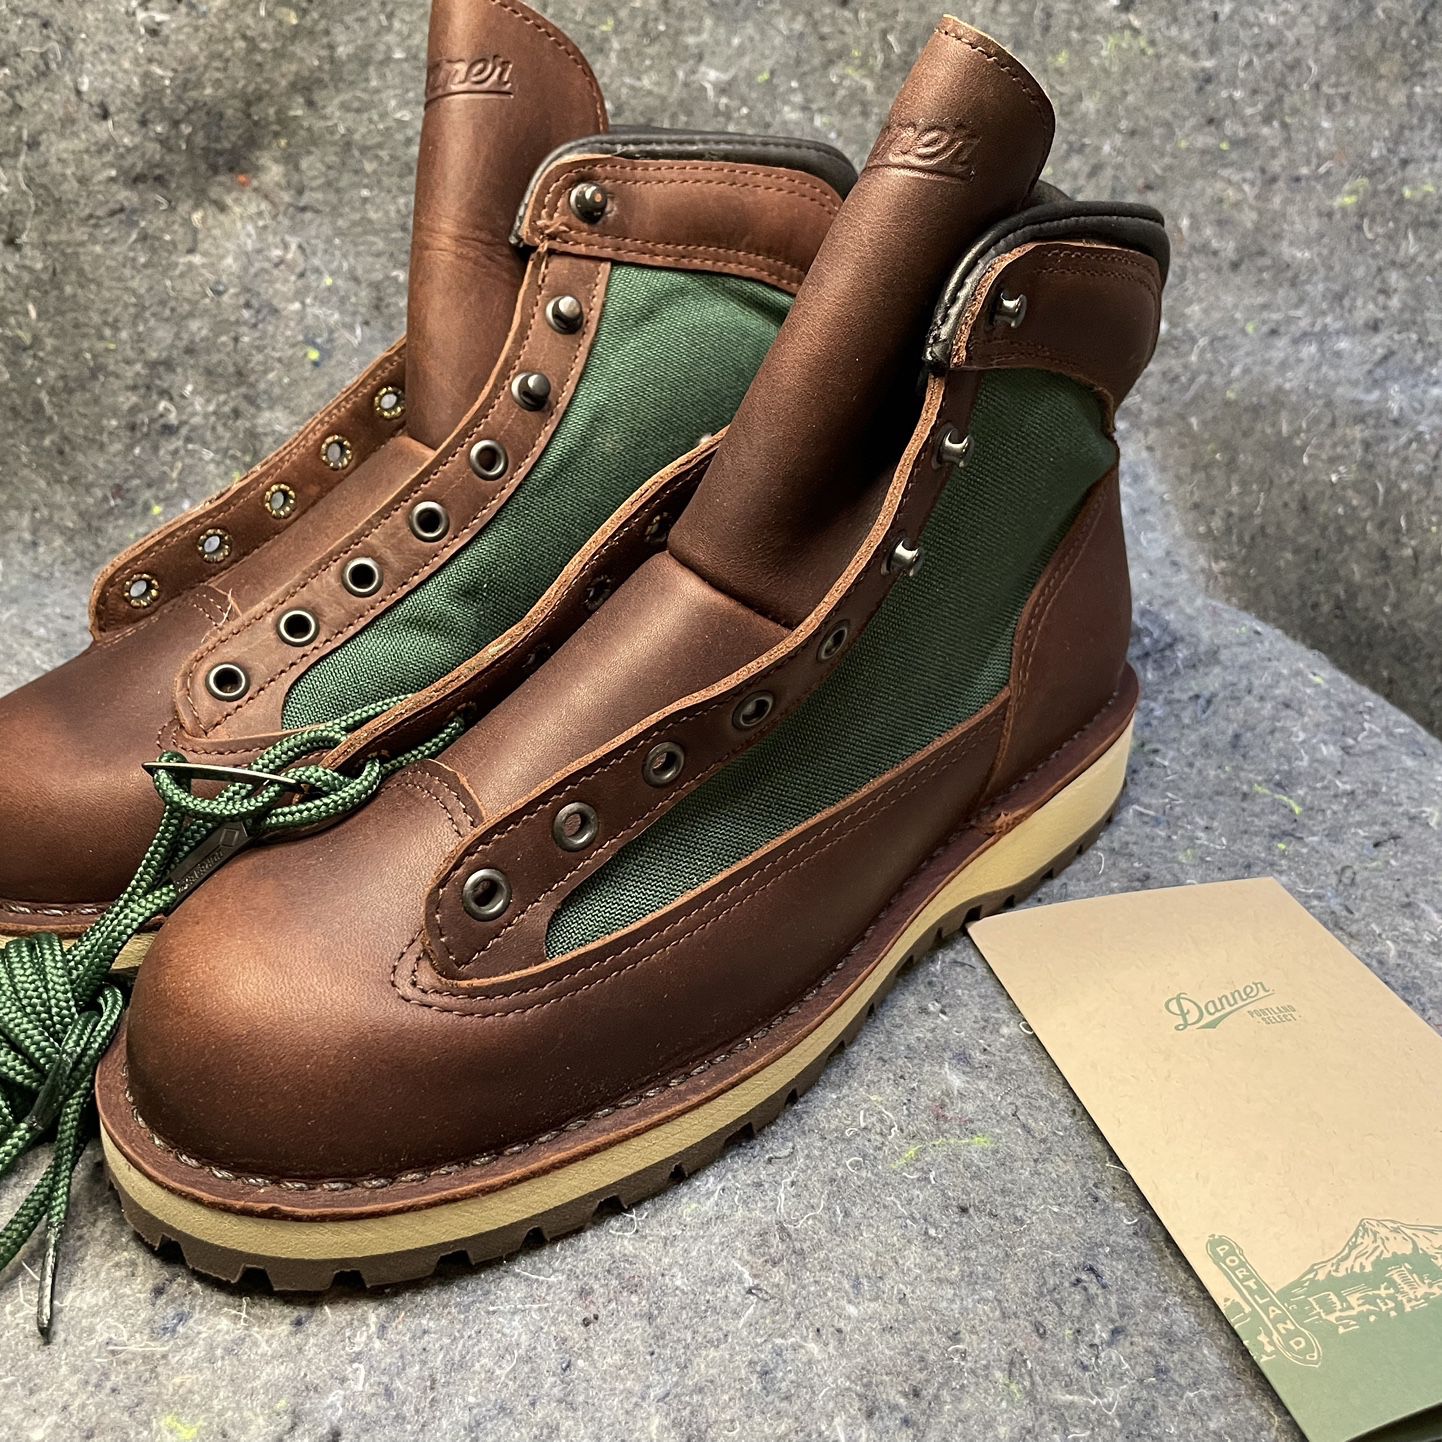 New In box Danner Boots 9.5 